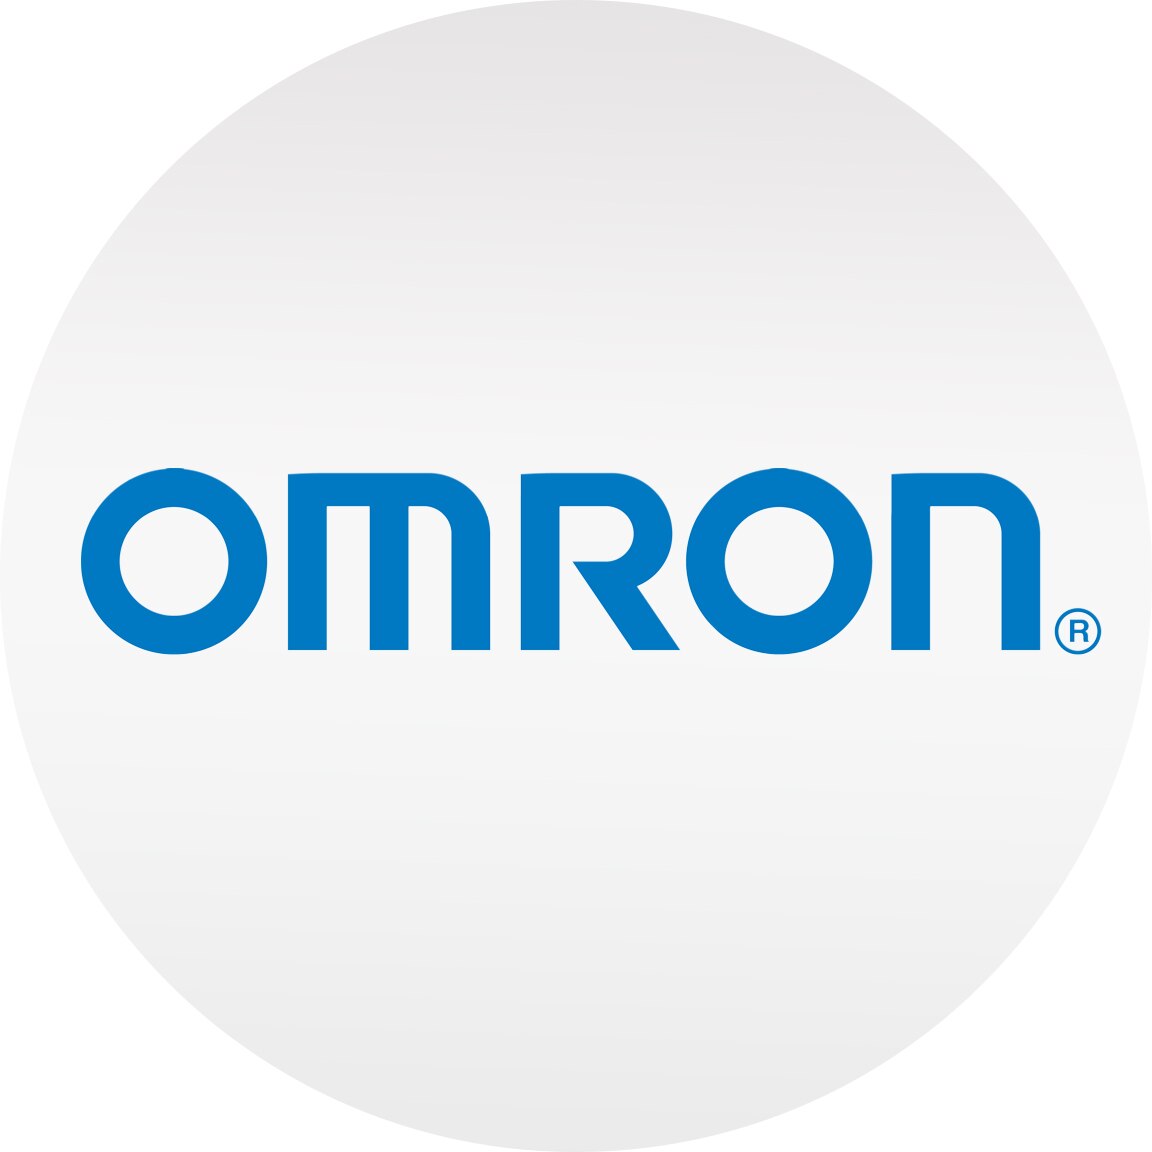 Shop for Omron brand products